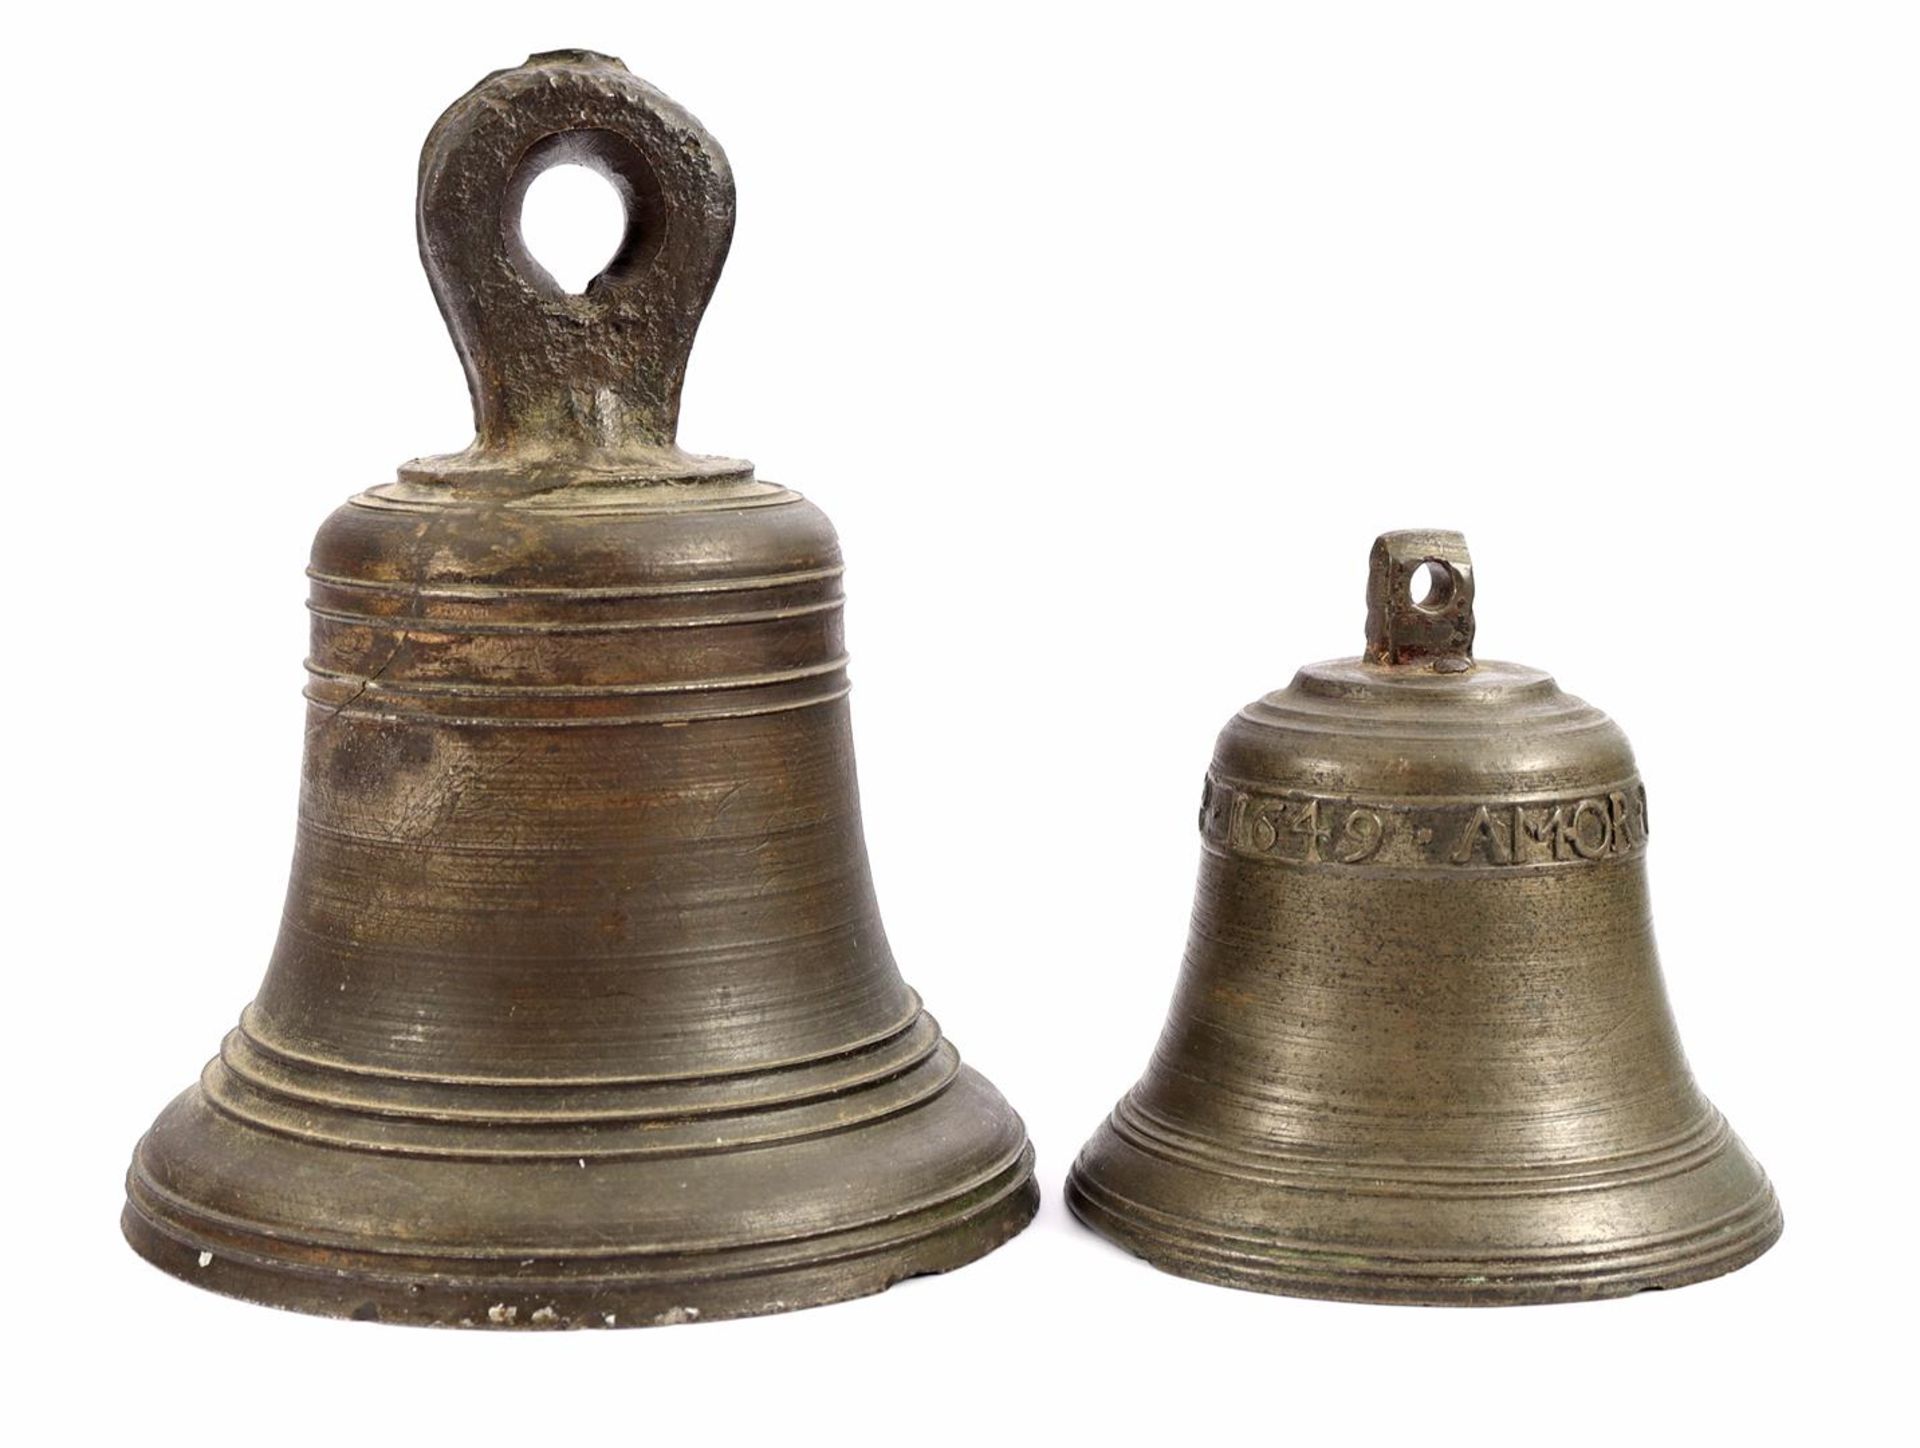 Bronze bell, probably 17th / 18th century